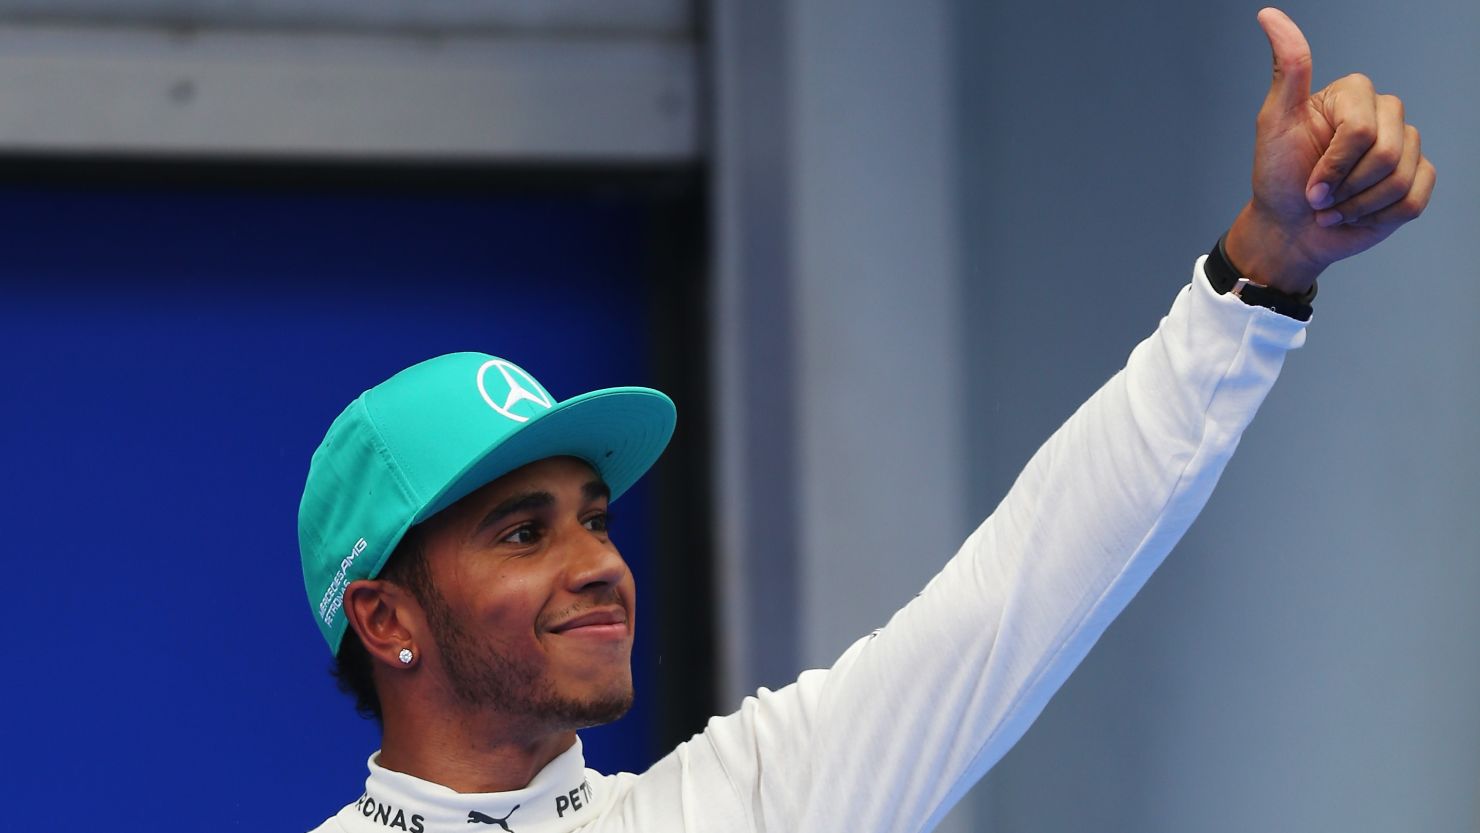 Lewis Hamilton was all smiles after finishing first in qualifying for the Malaysian Grand Prix. 